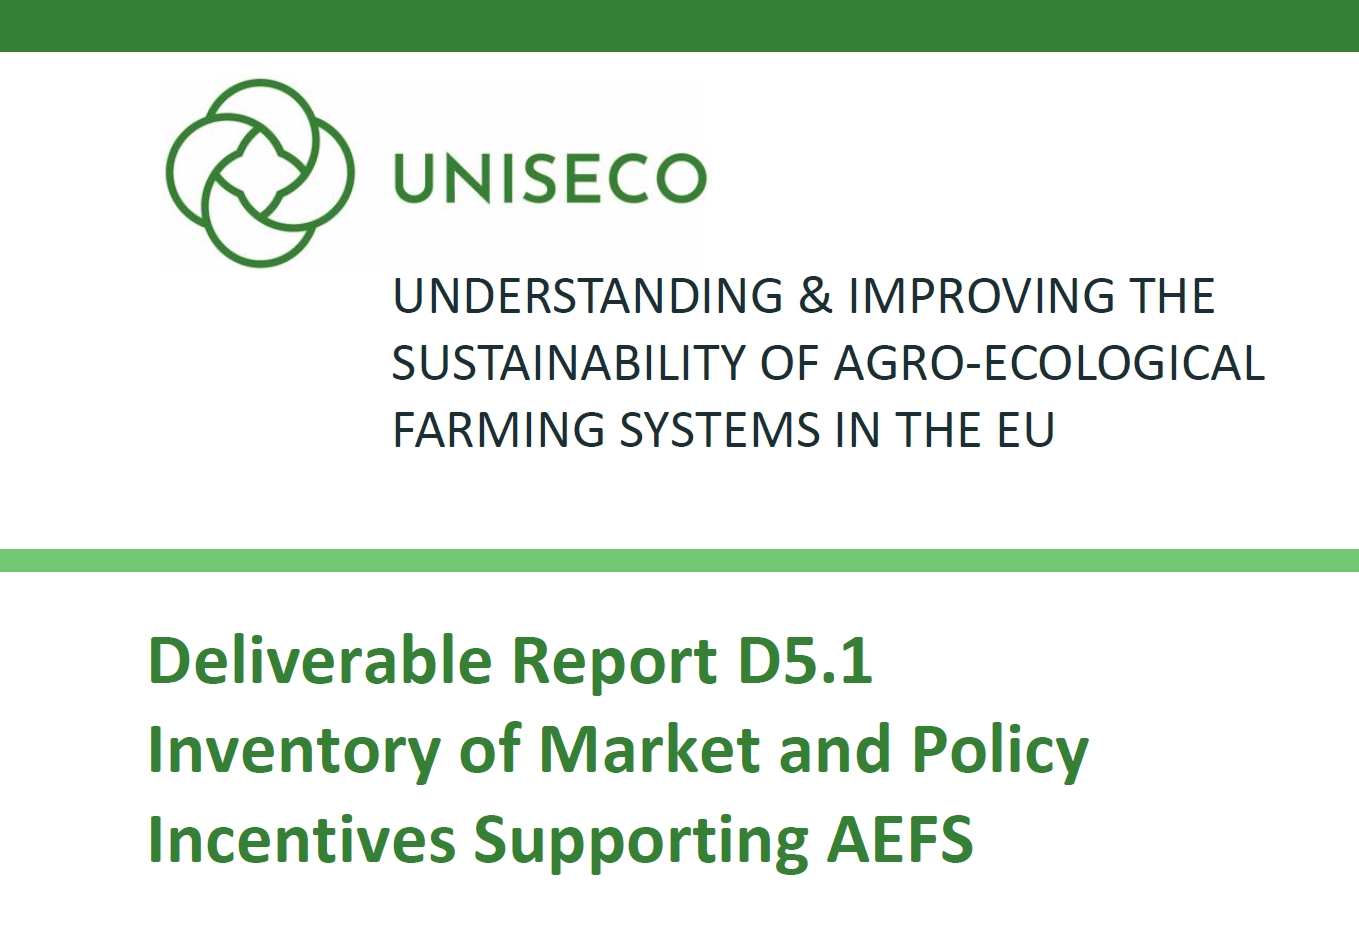 D5.1 - Inventory of Market and Policy Incentives Supporting AEFS published